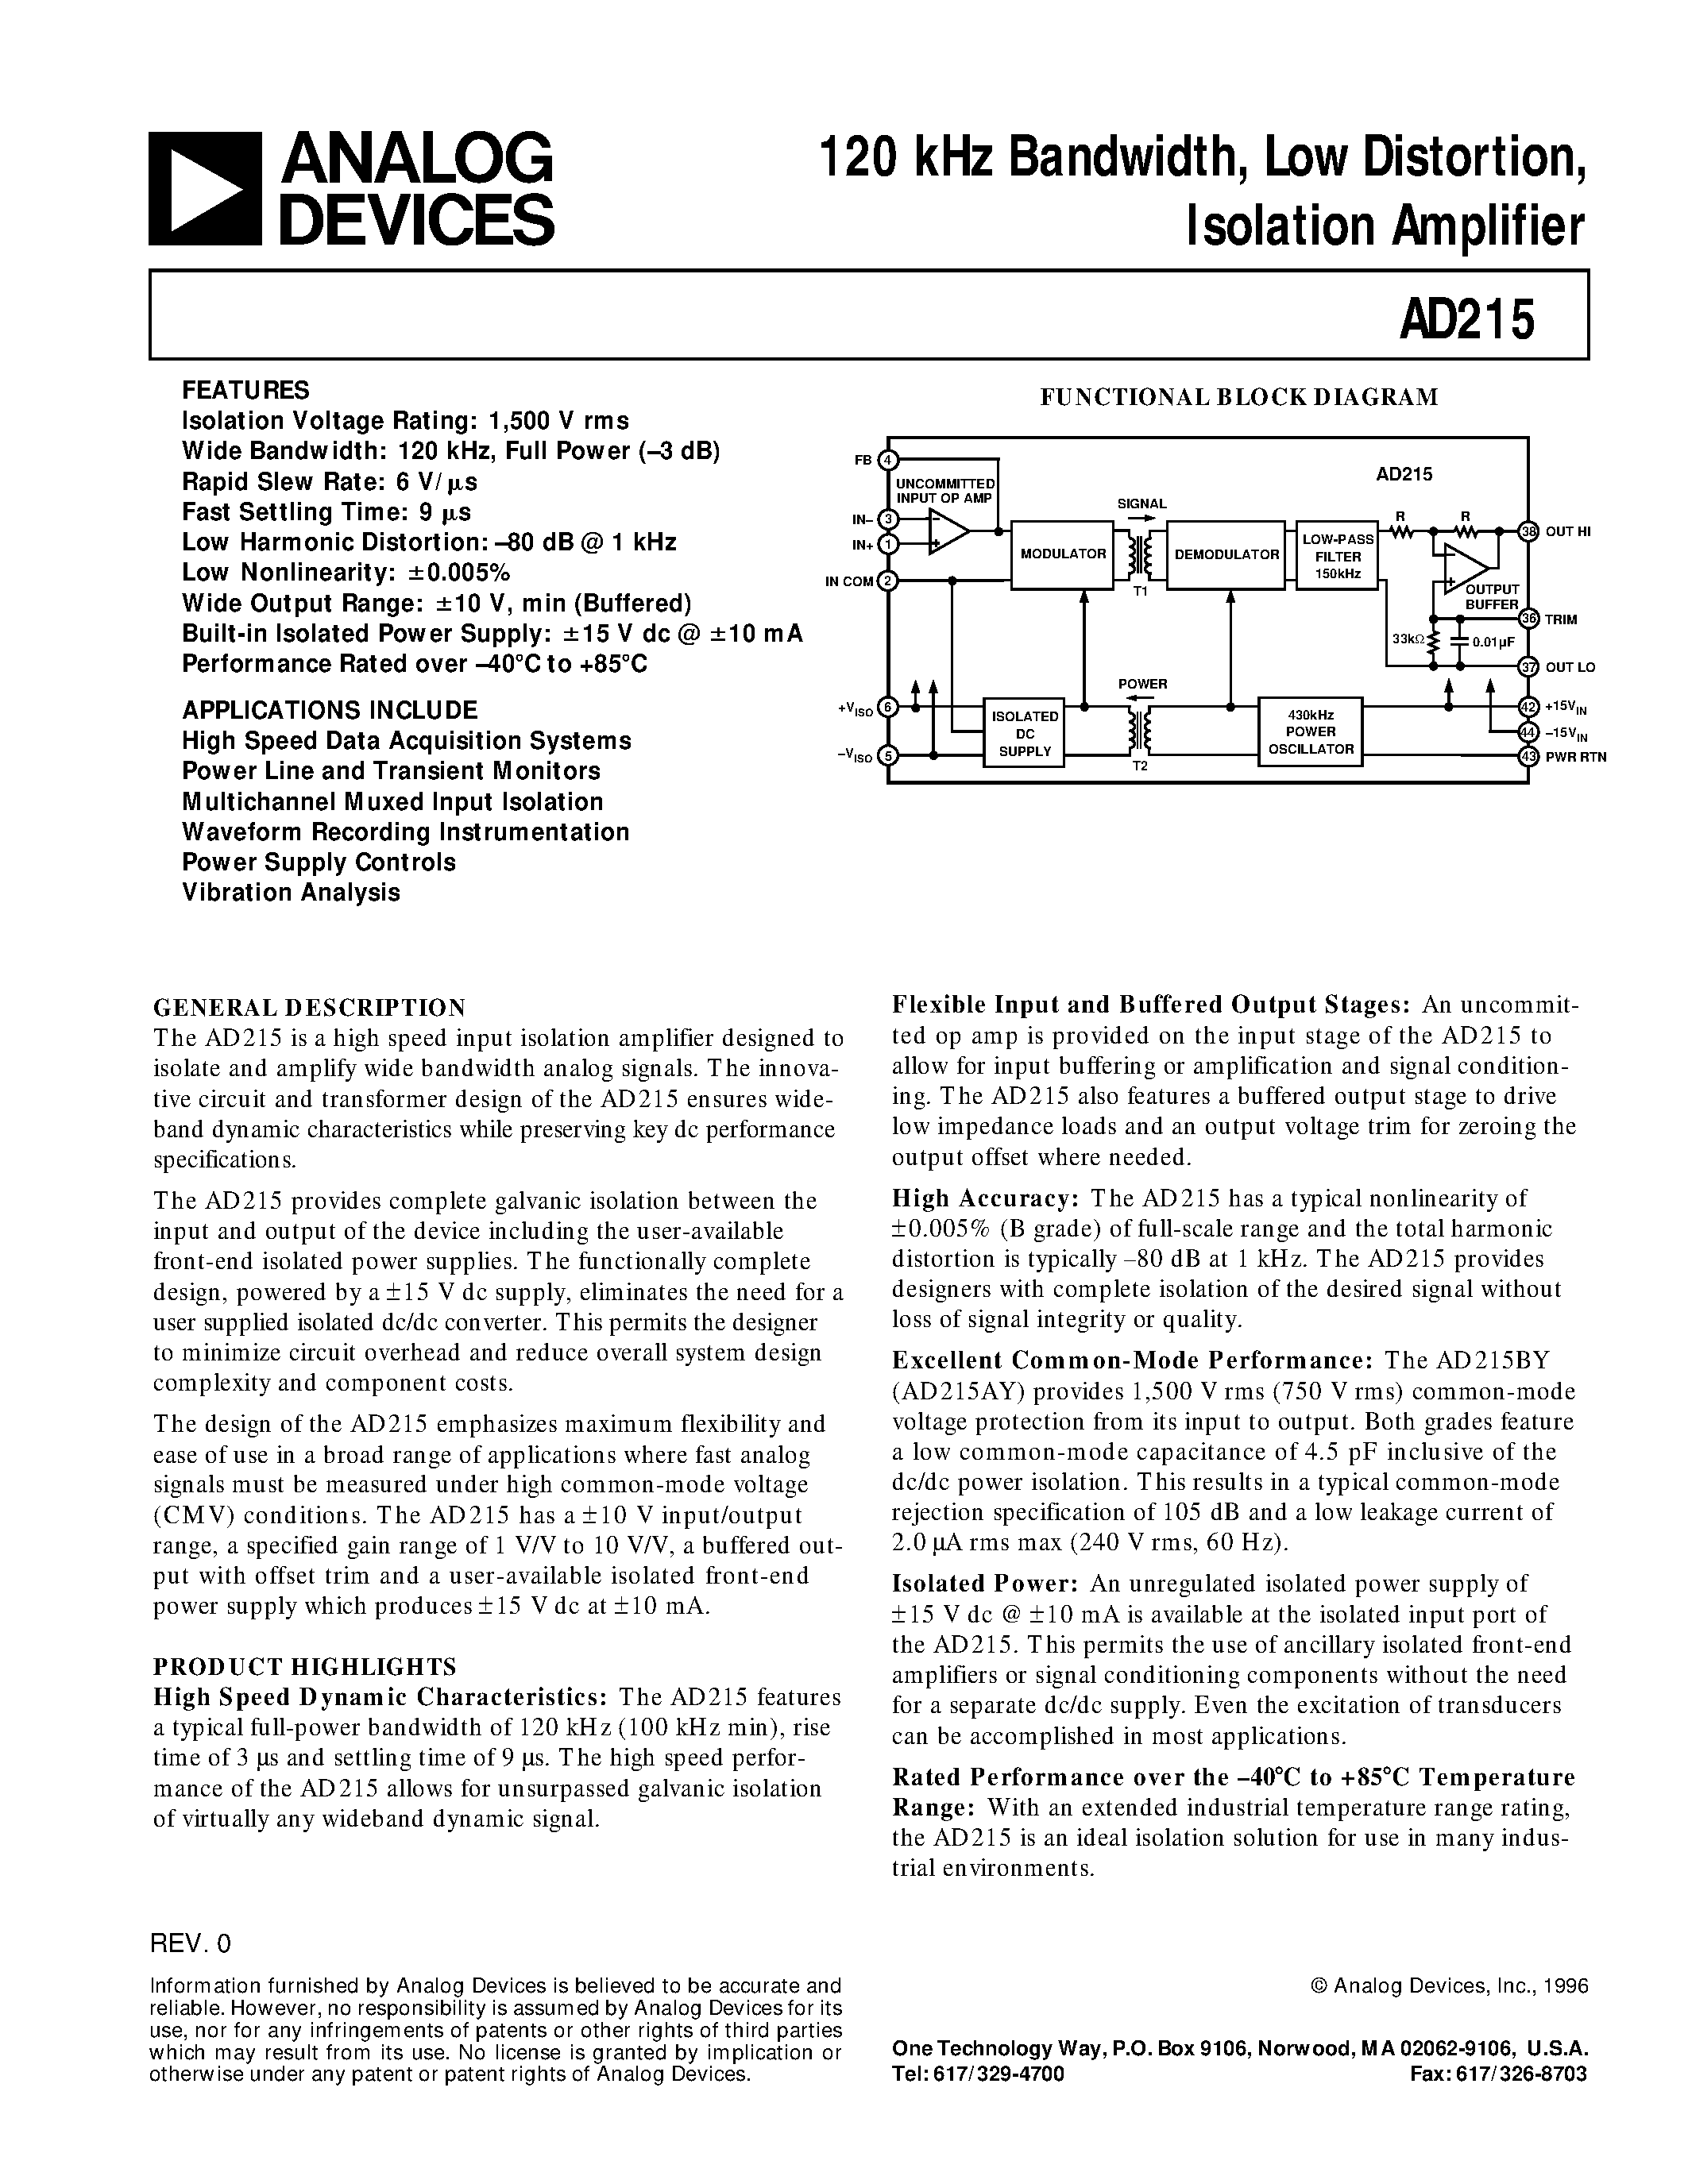 Datasheet AD215 - 120 kHz Bandwidth/ Low Distortion/ Isolation Amplifier page 1